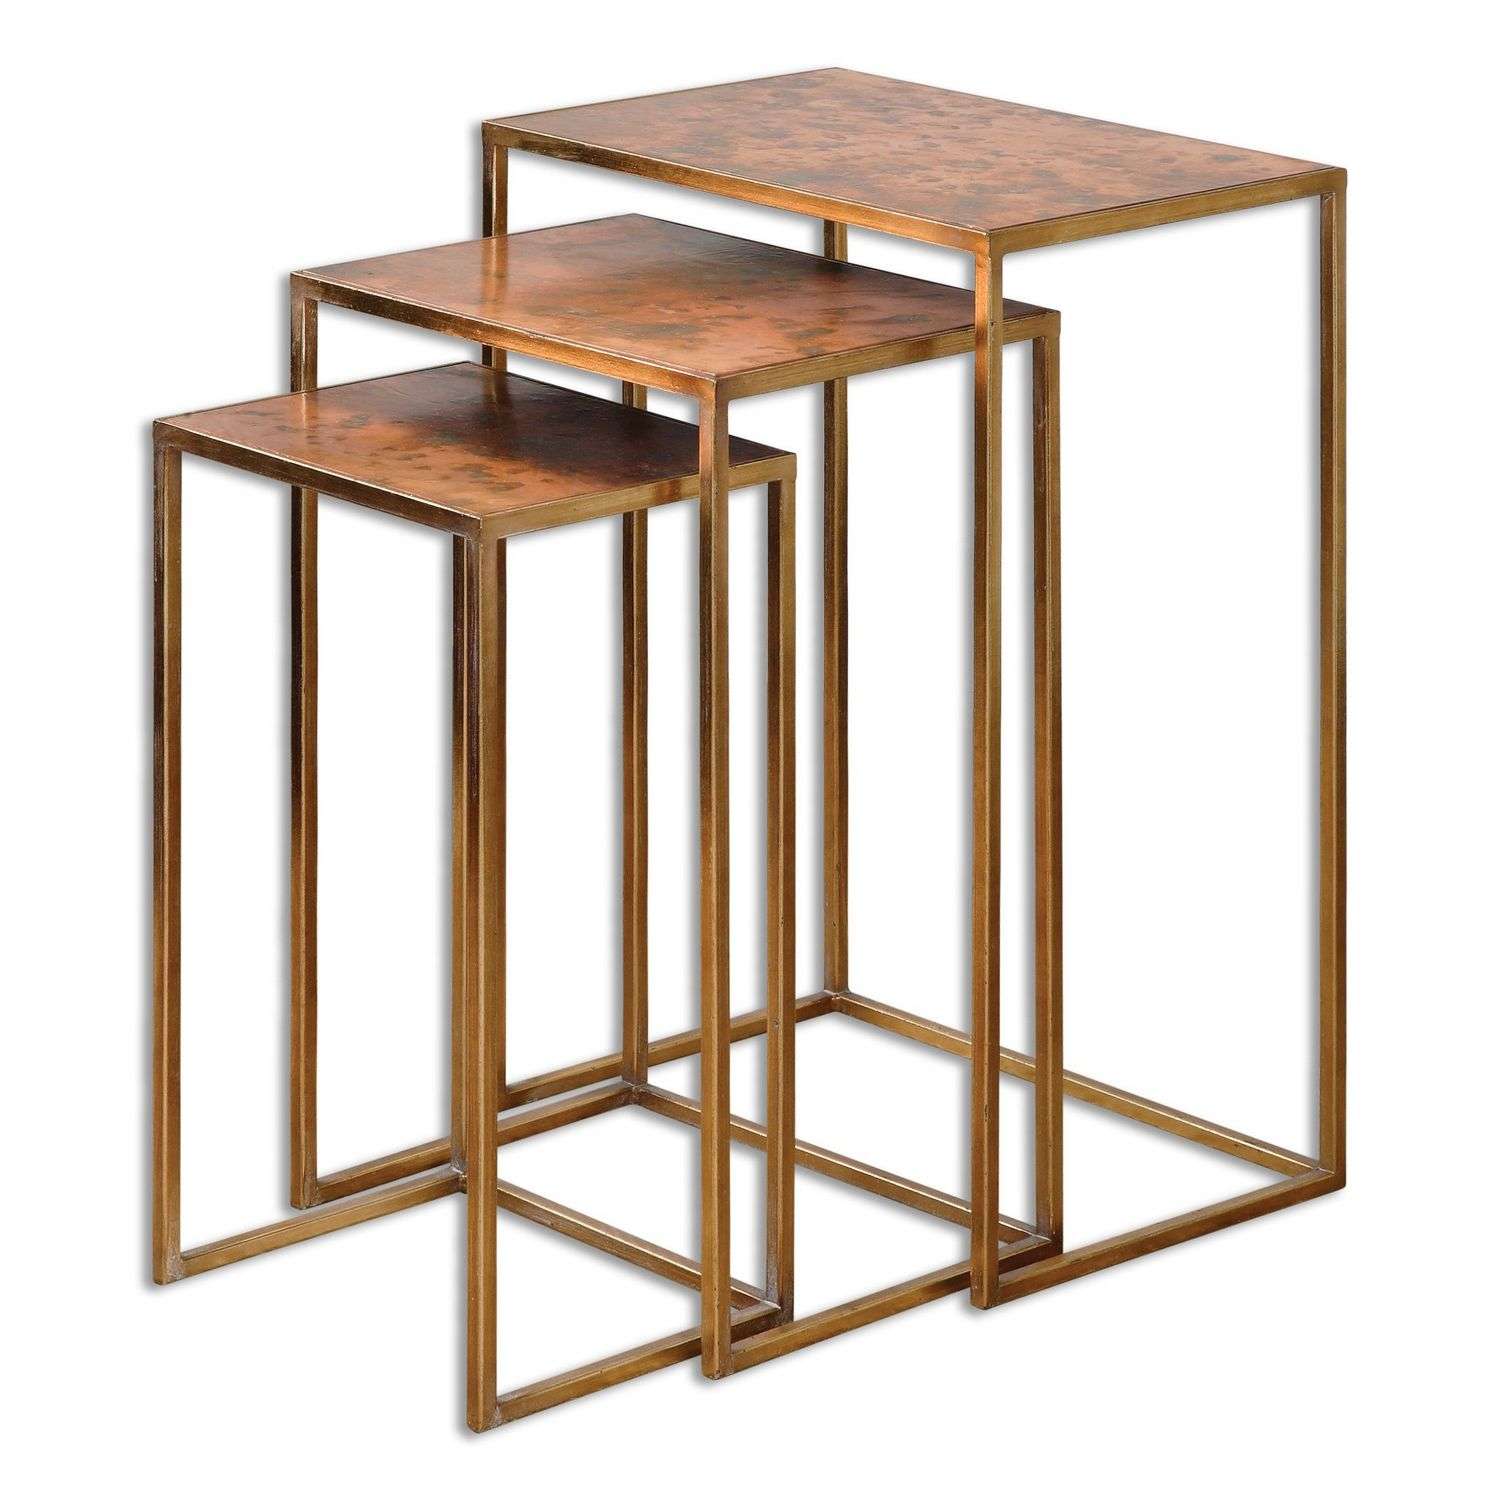 Uttermost Copres Oxidized Nesting Tables - Set of 3